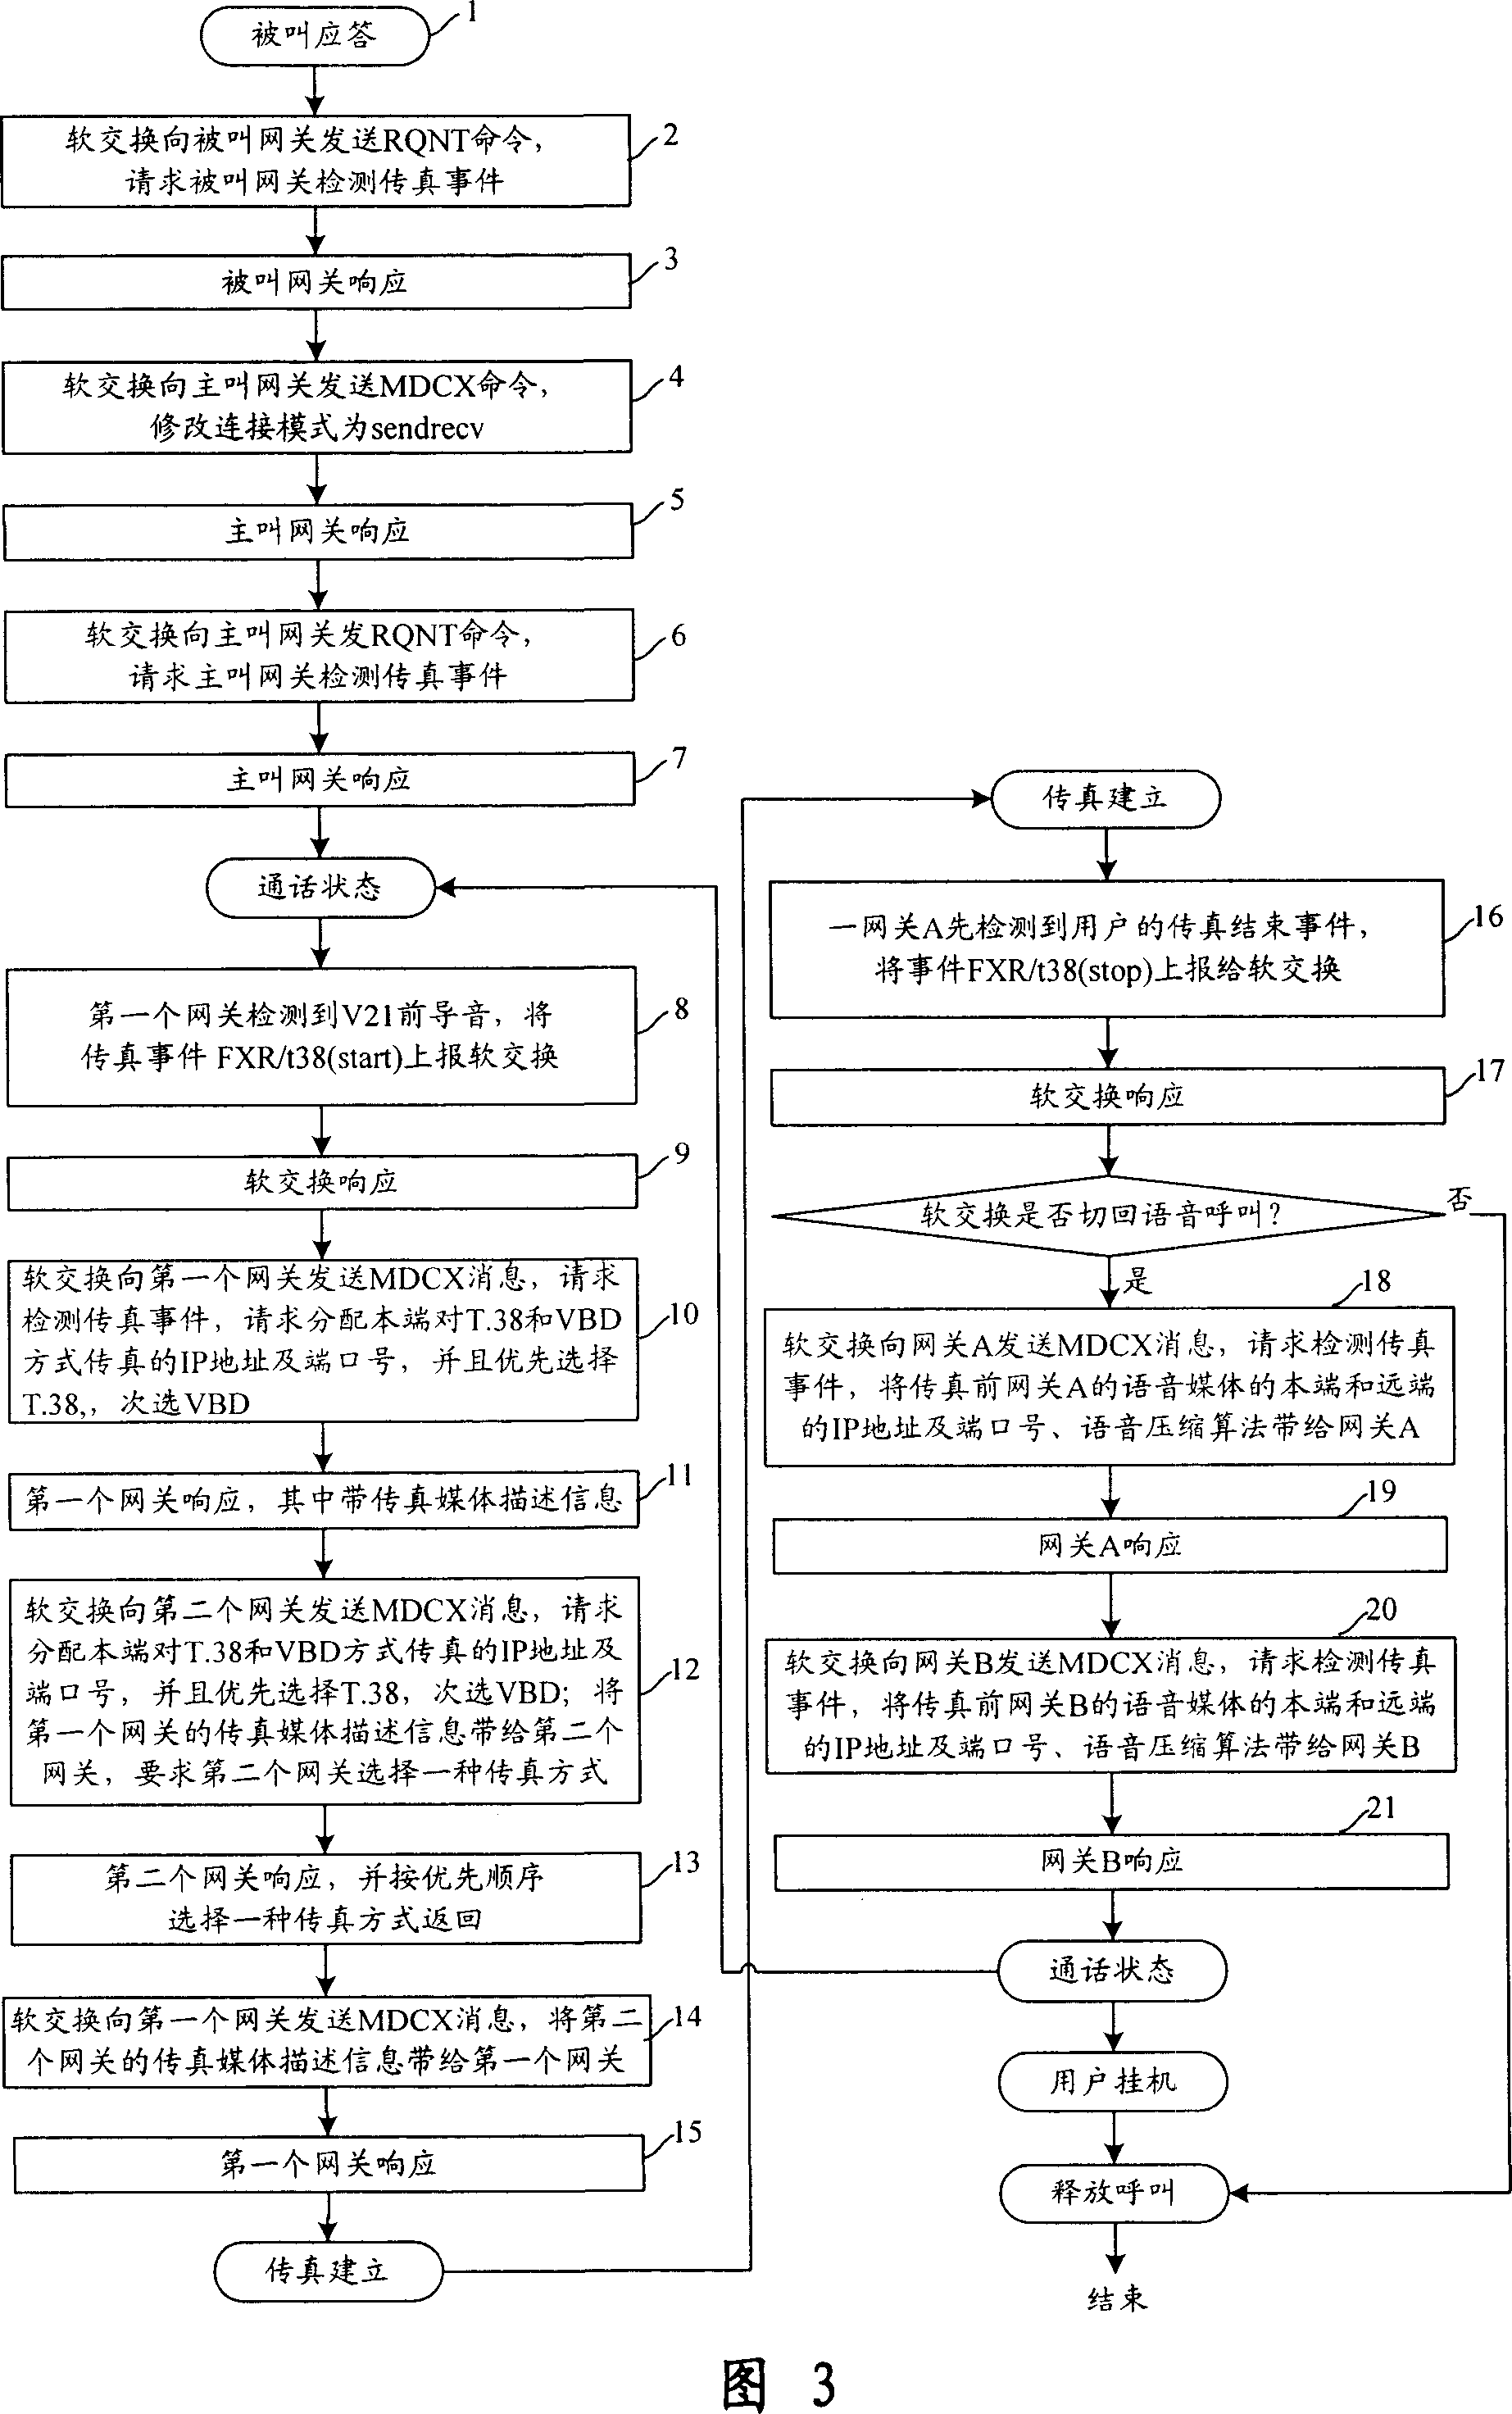 Implementation method of the high-speed fax signaling flow supported by the gateway control protocol